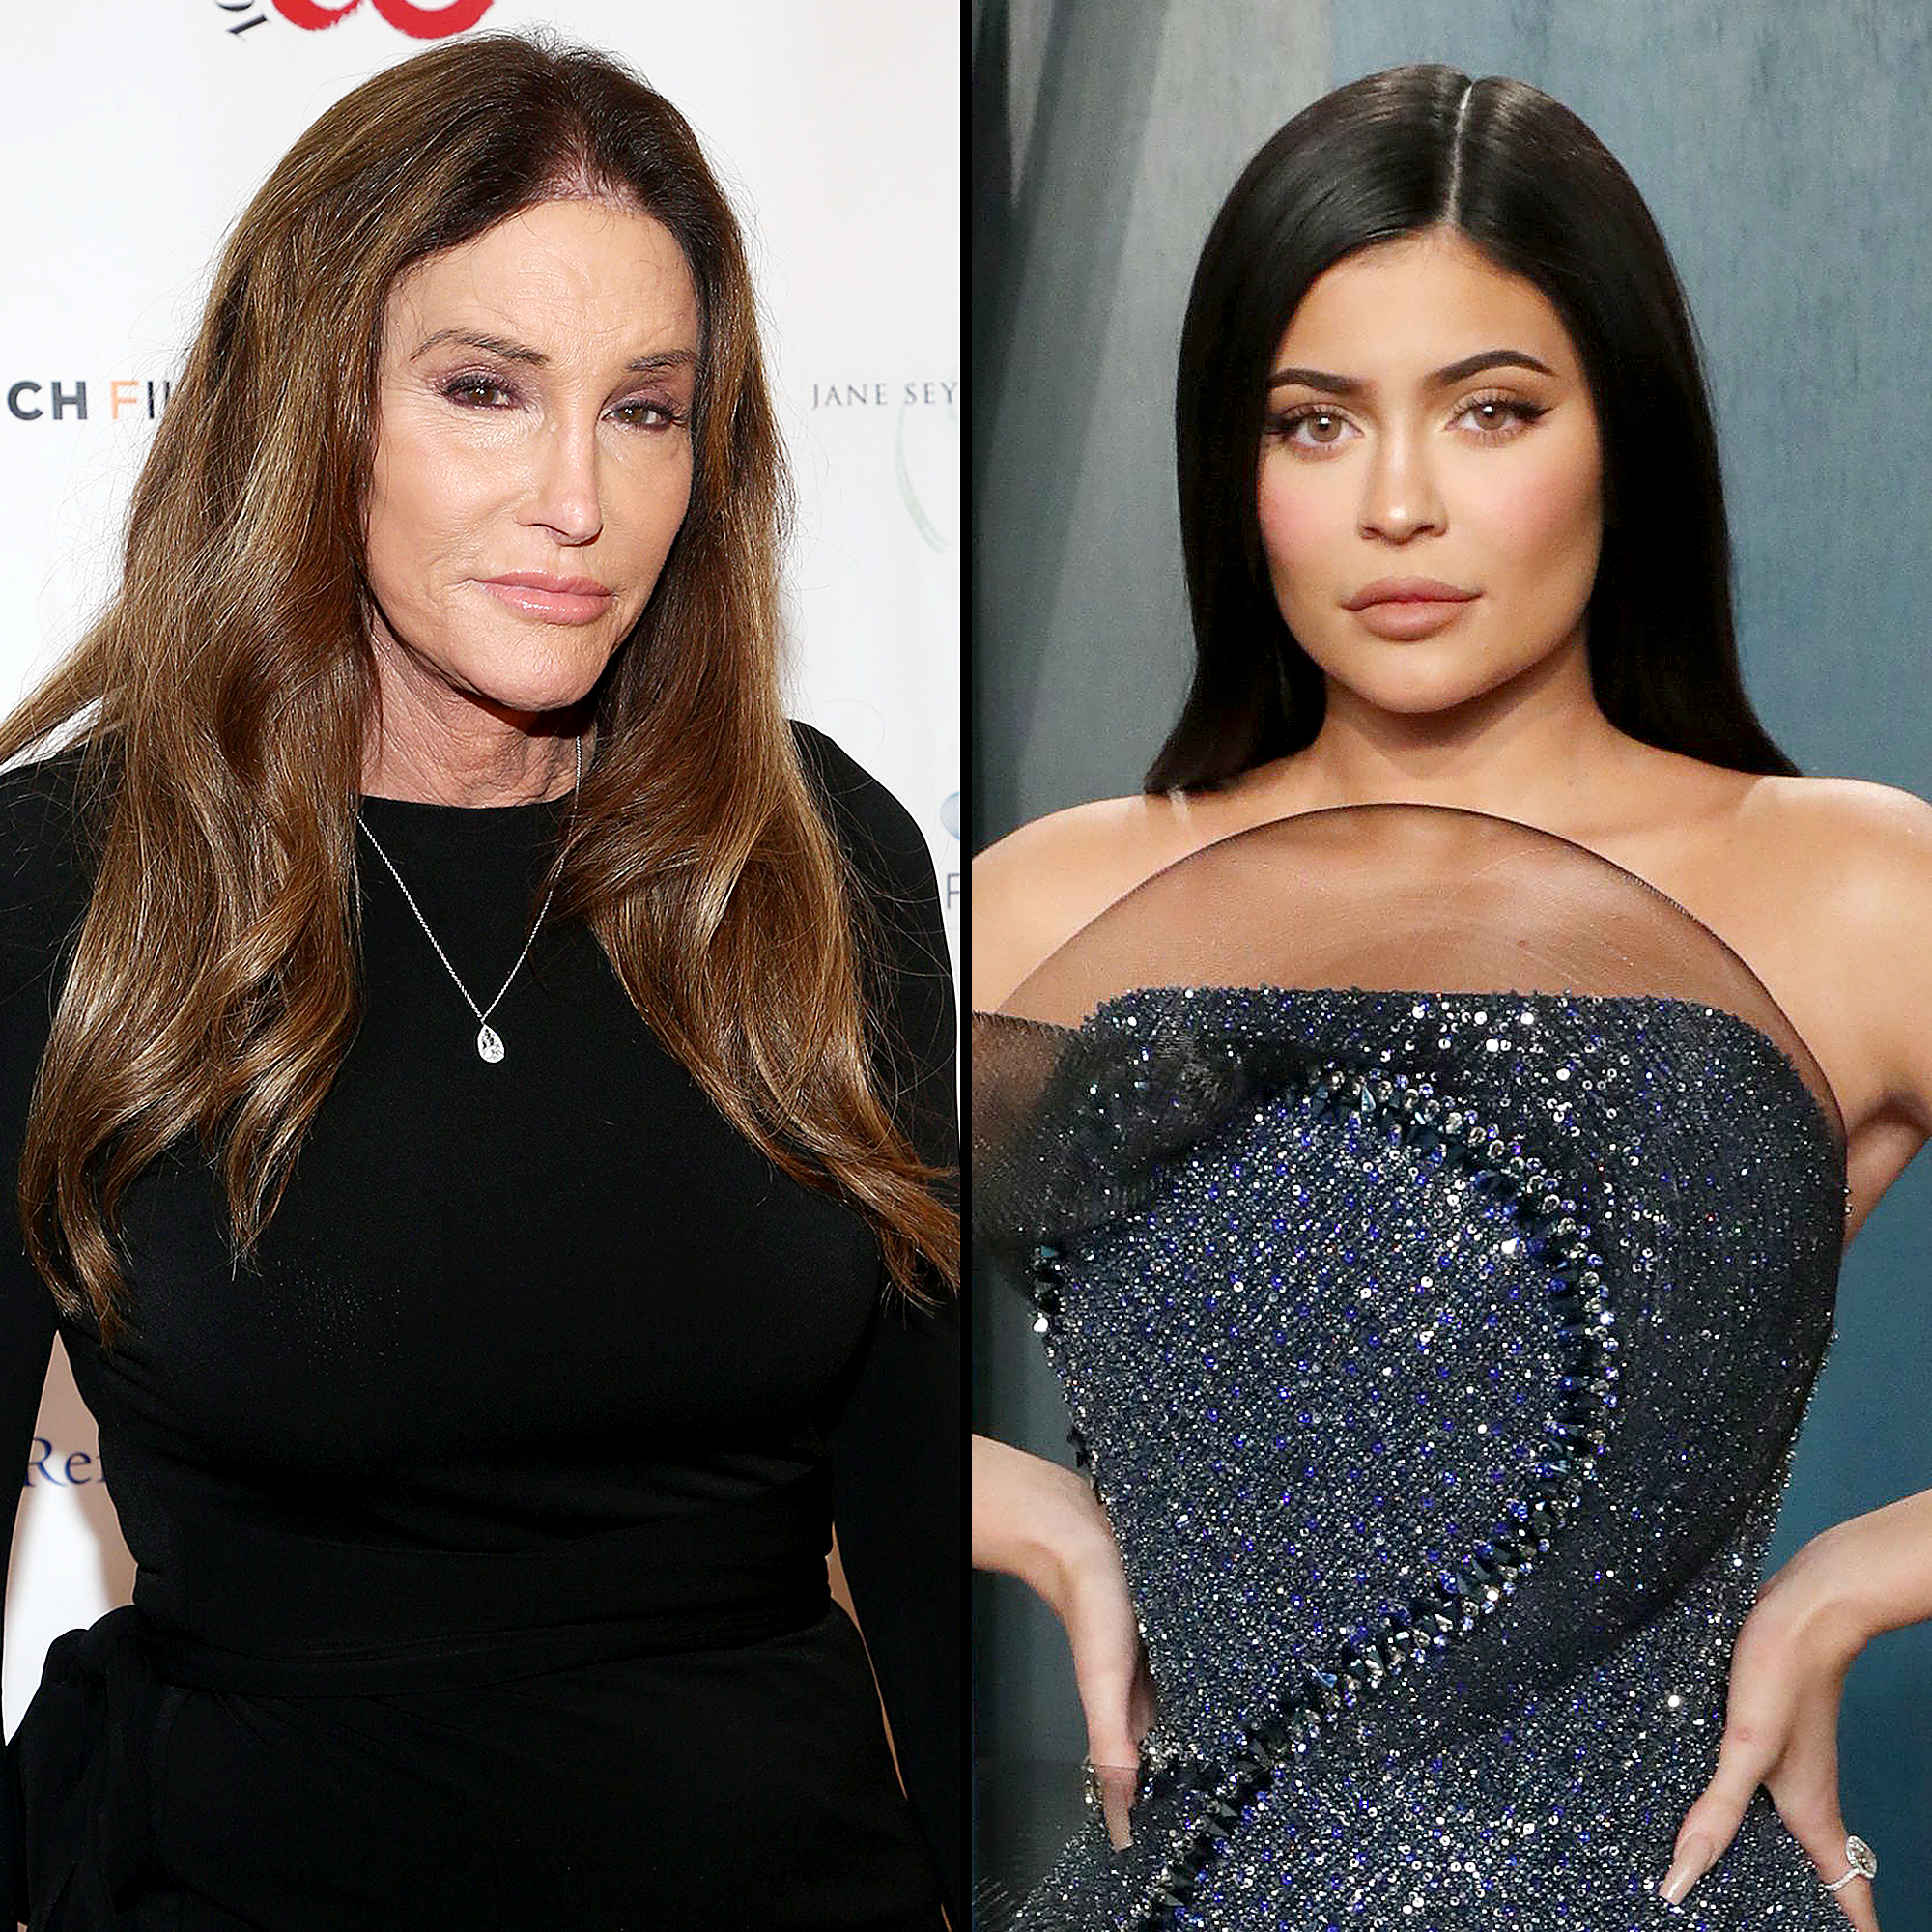 Caitlyn Jenner Opens Up About Her Close Bond With Kylie Jenner